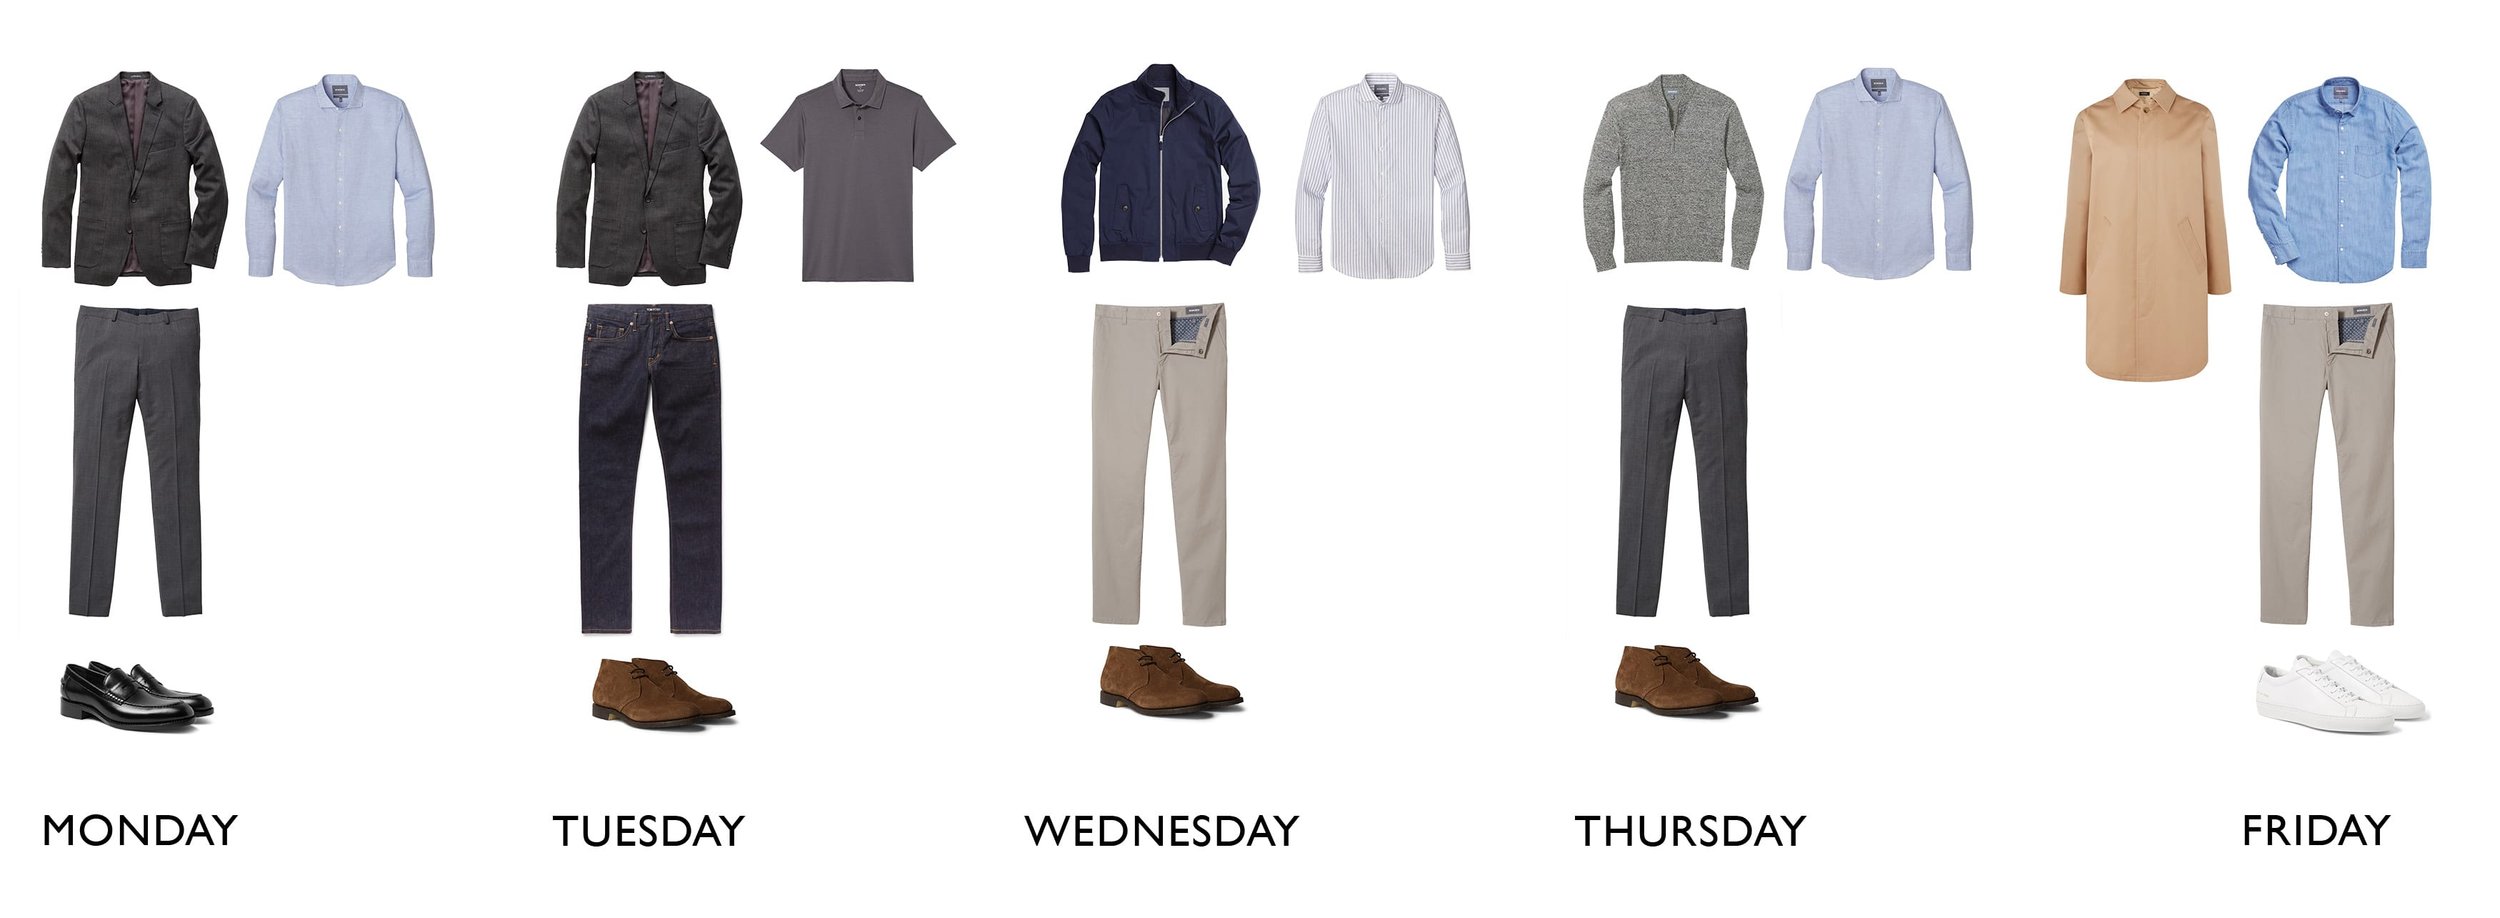 The Men's Style Guide: Capsule Wardrobe Essentials for Casual & Business  Wear